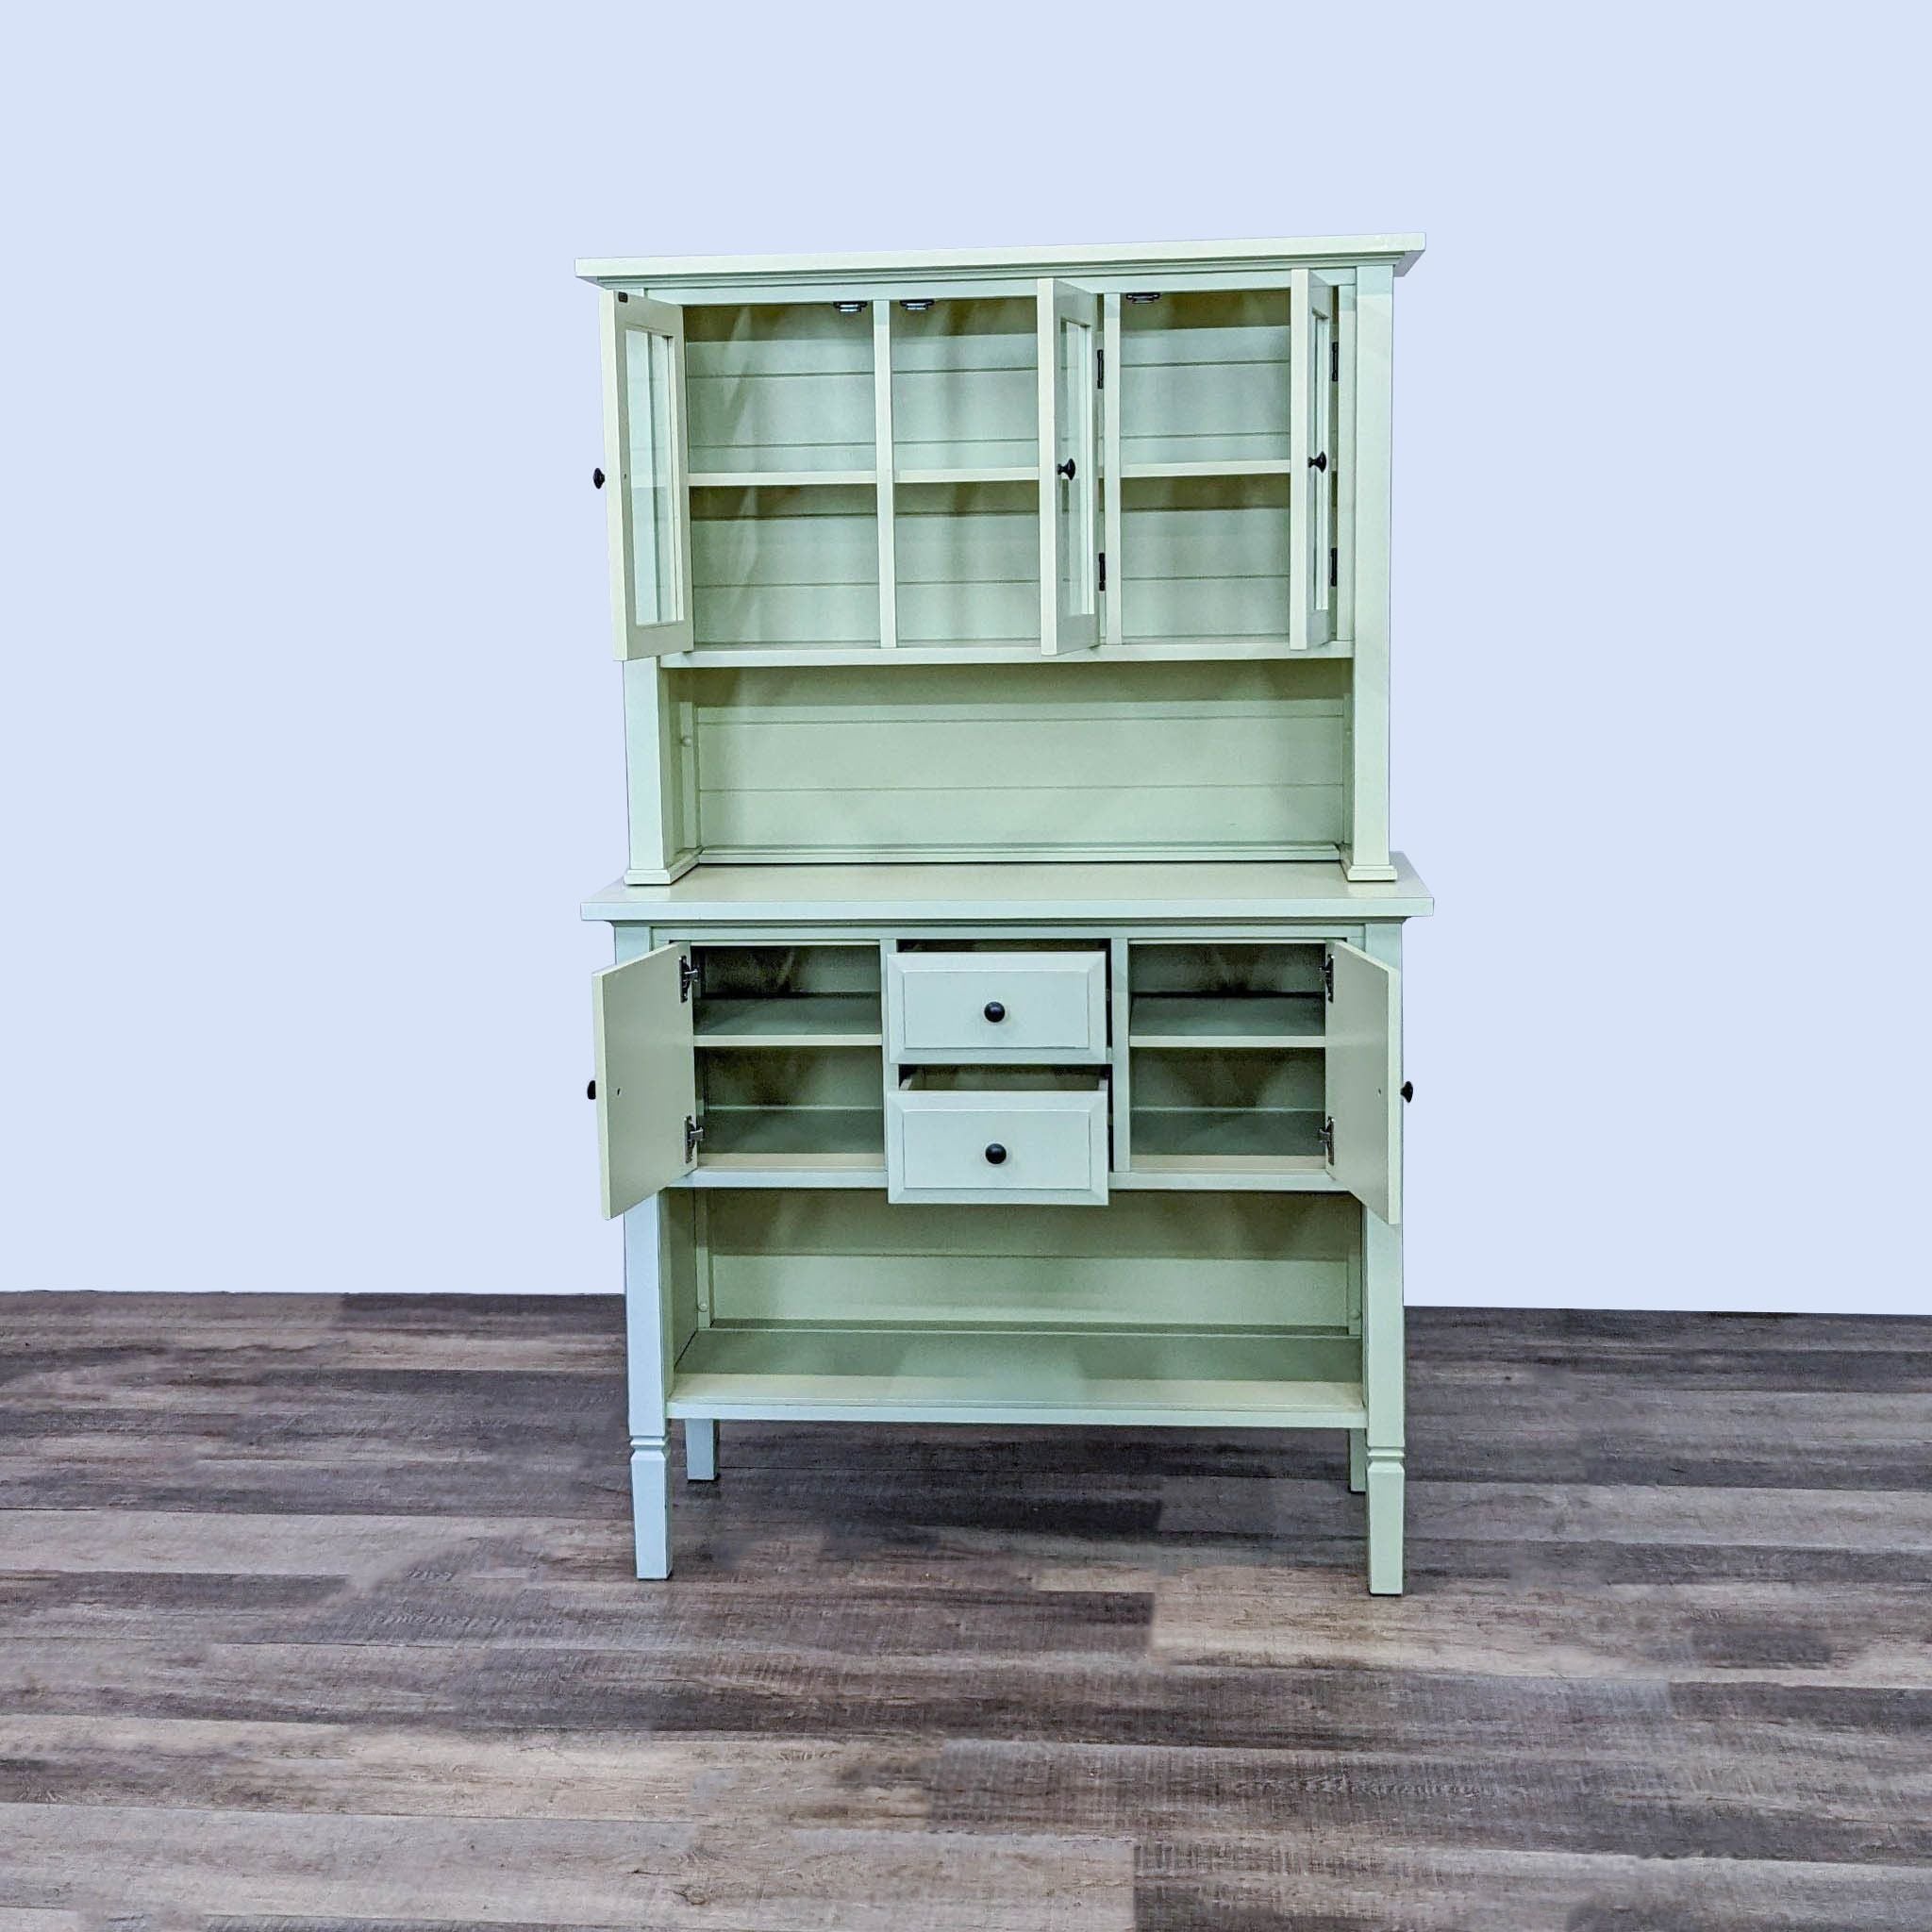 Two-piece Crate & Barrel green hutch with upper glass-front cabinets and lower drawers, designed by Kathleen Wills, showcased on a wooden floor.